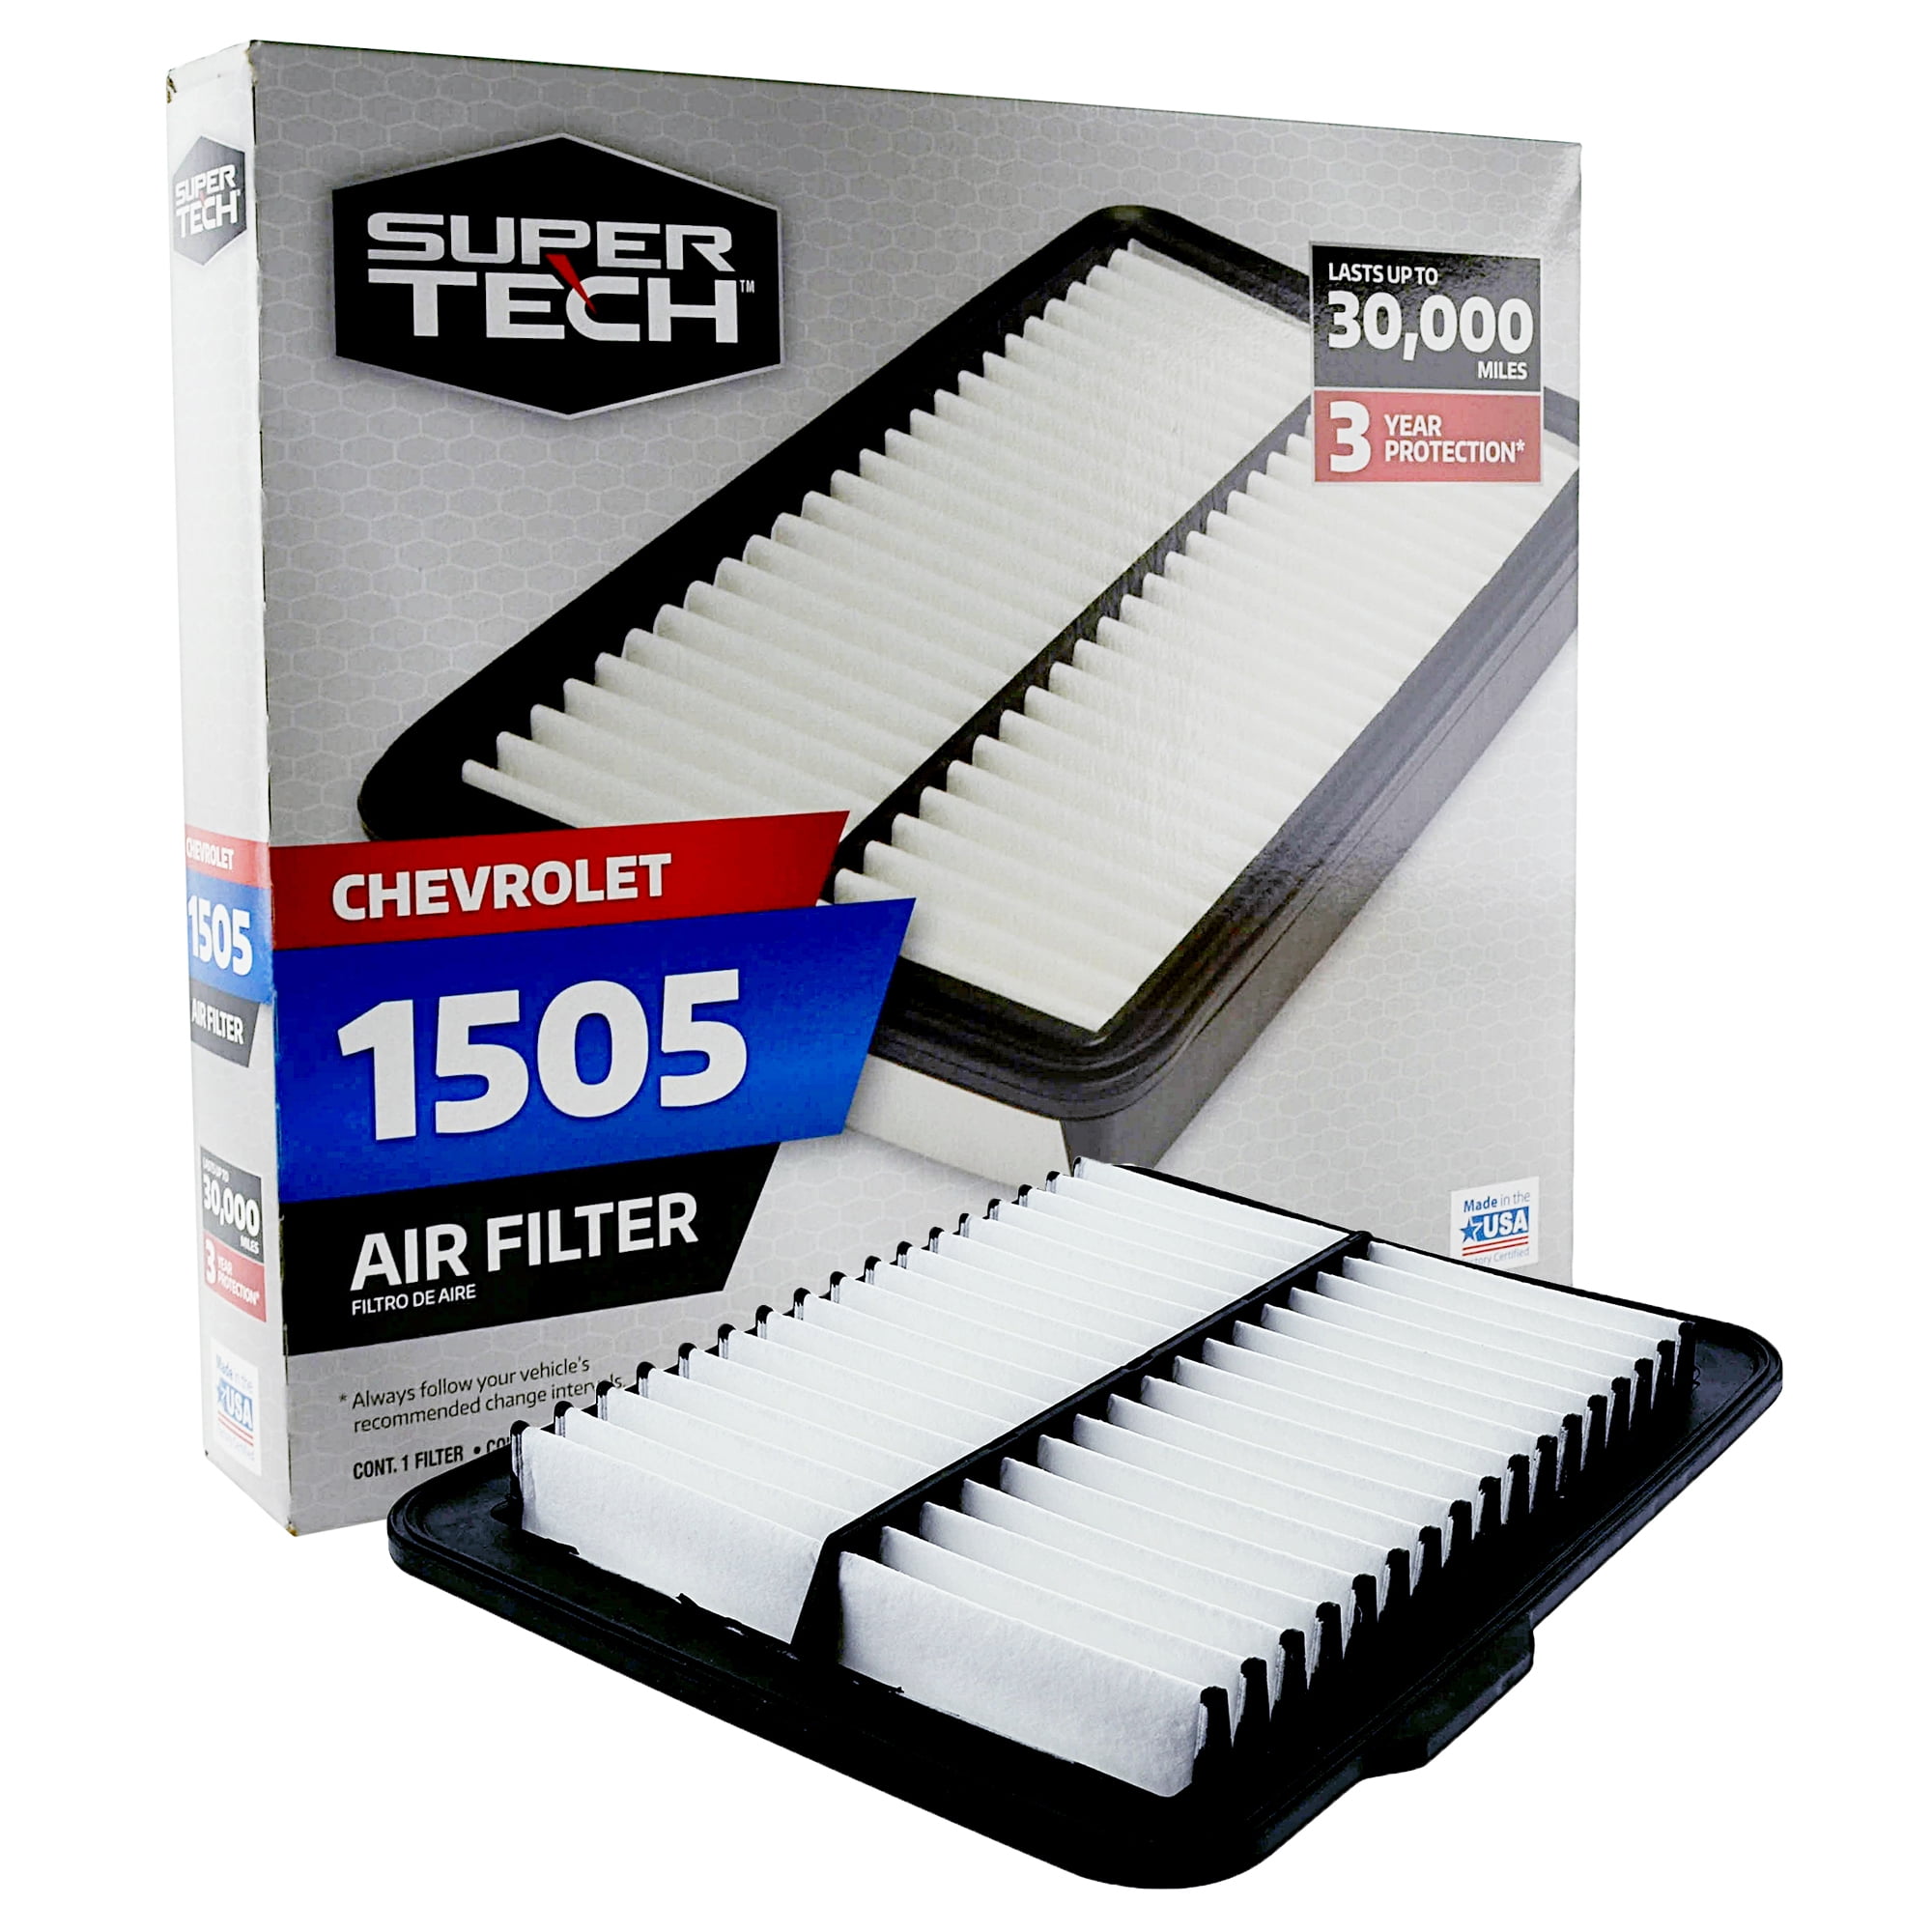 SuperTech 1505 Engine Air Filter, Replacement Filter for GM or Chevrolet